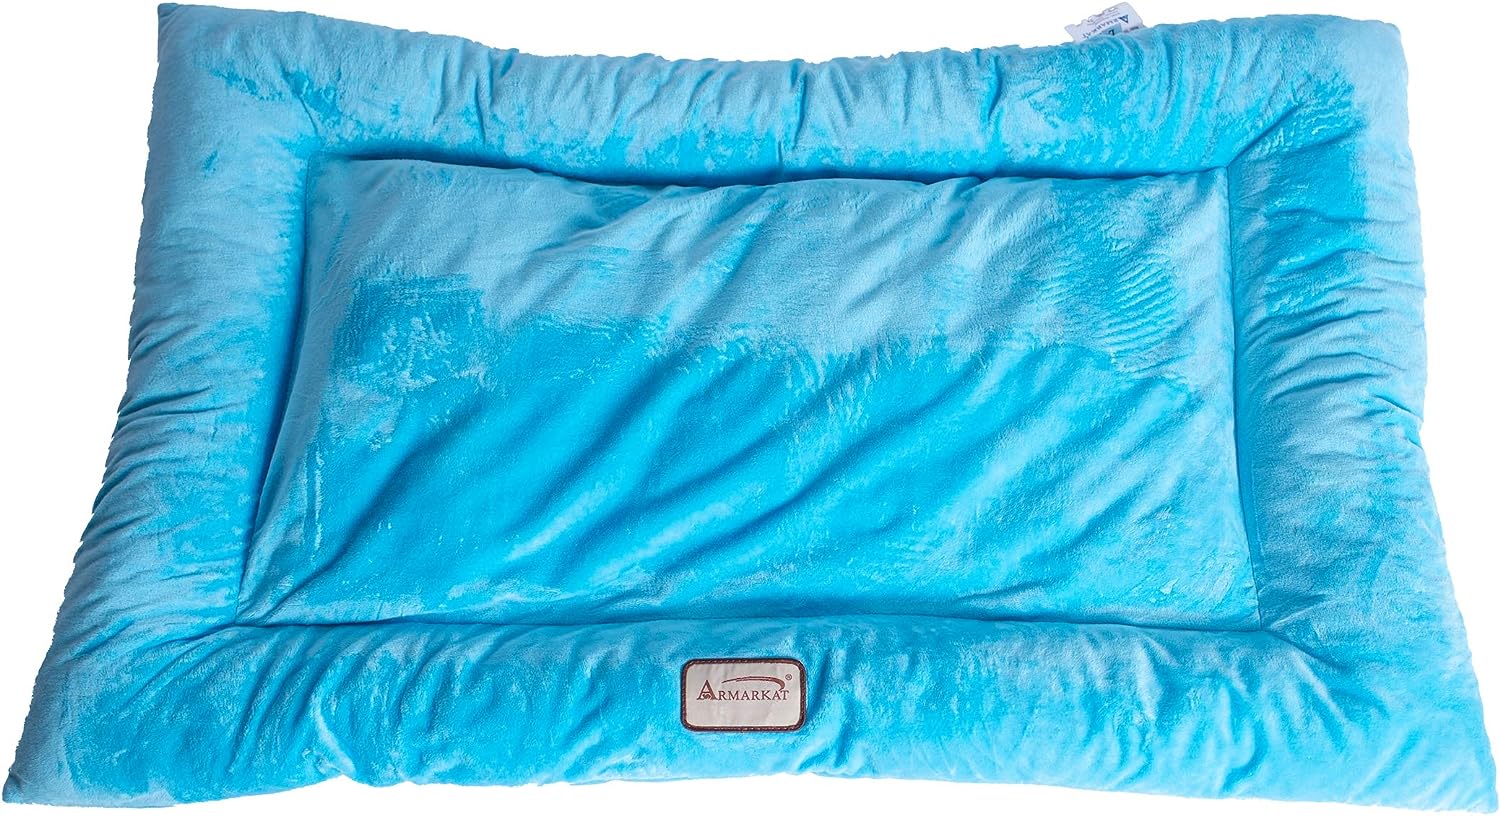 Armarkat Pet Bed Mat 35-Inch by 22-Inch by 3-Inch M01-Large, Sky Blue